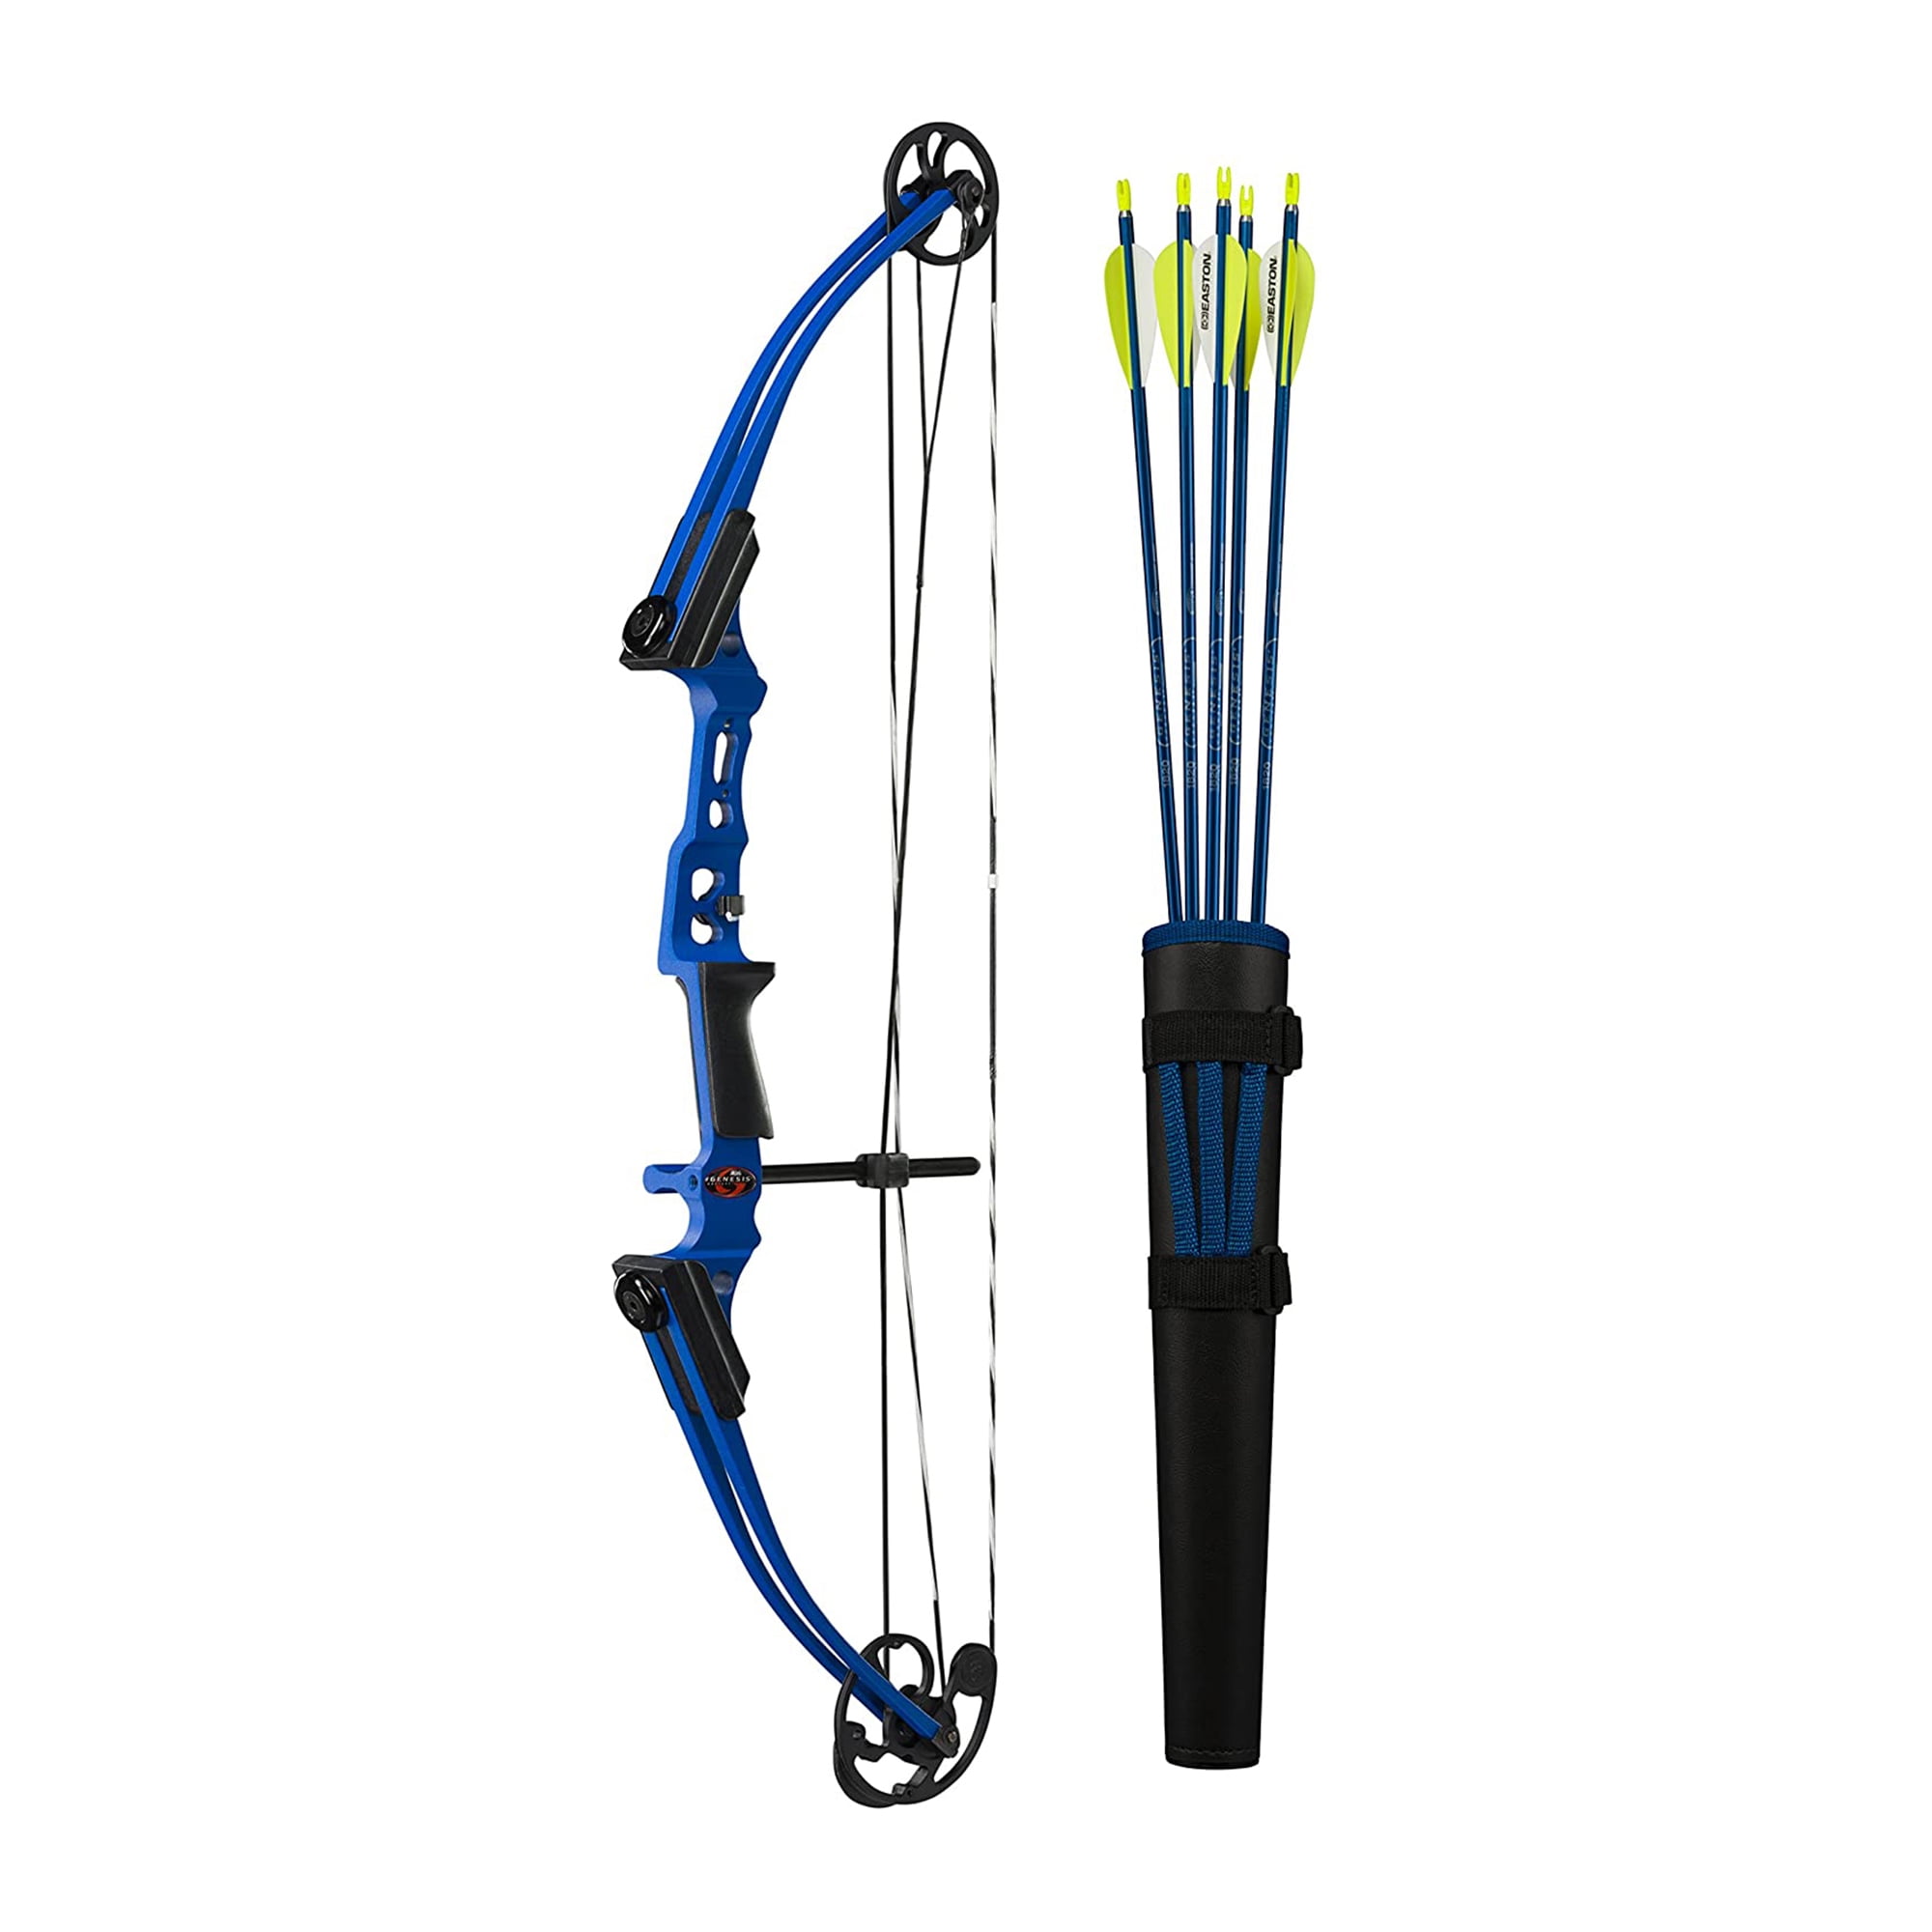 Details about   30-50lbs Archery Recurve Bow Left Right Hand Longbow Set Arrow Outdoor Practice 